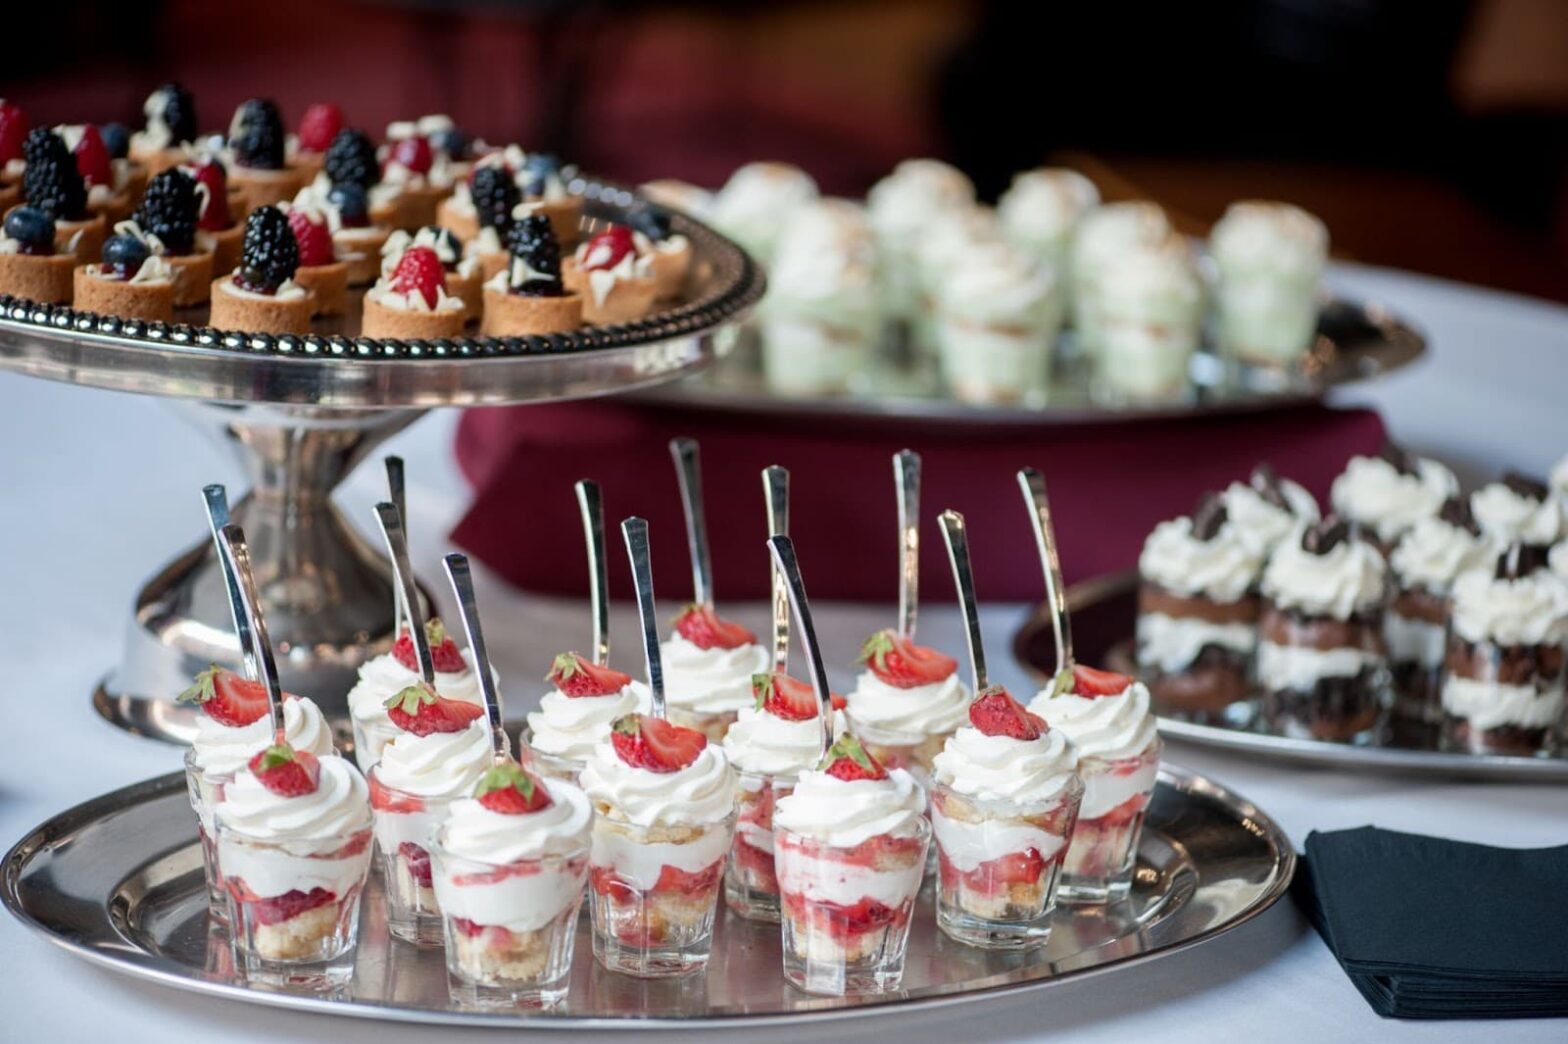 I. Introduction to Wedding Catering and Cake Options